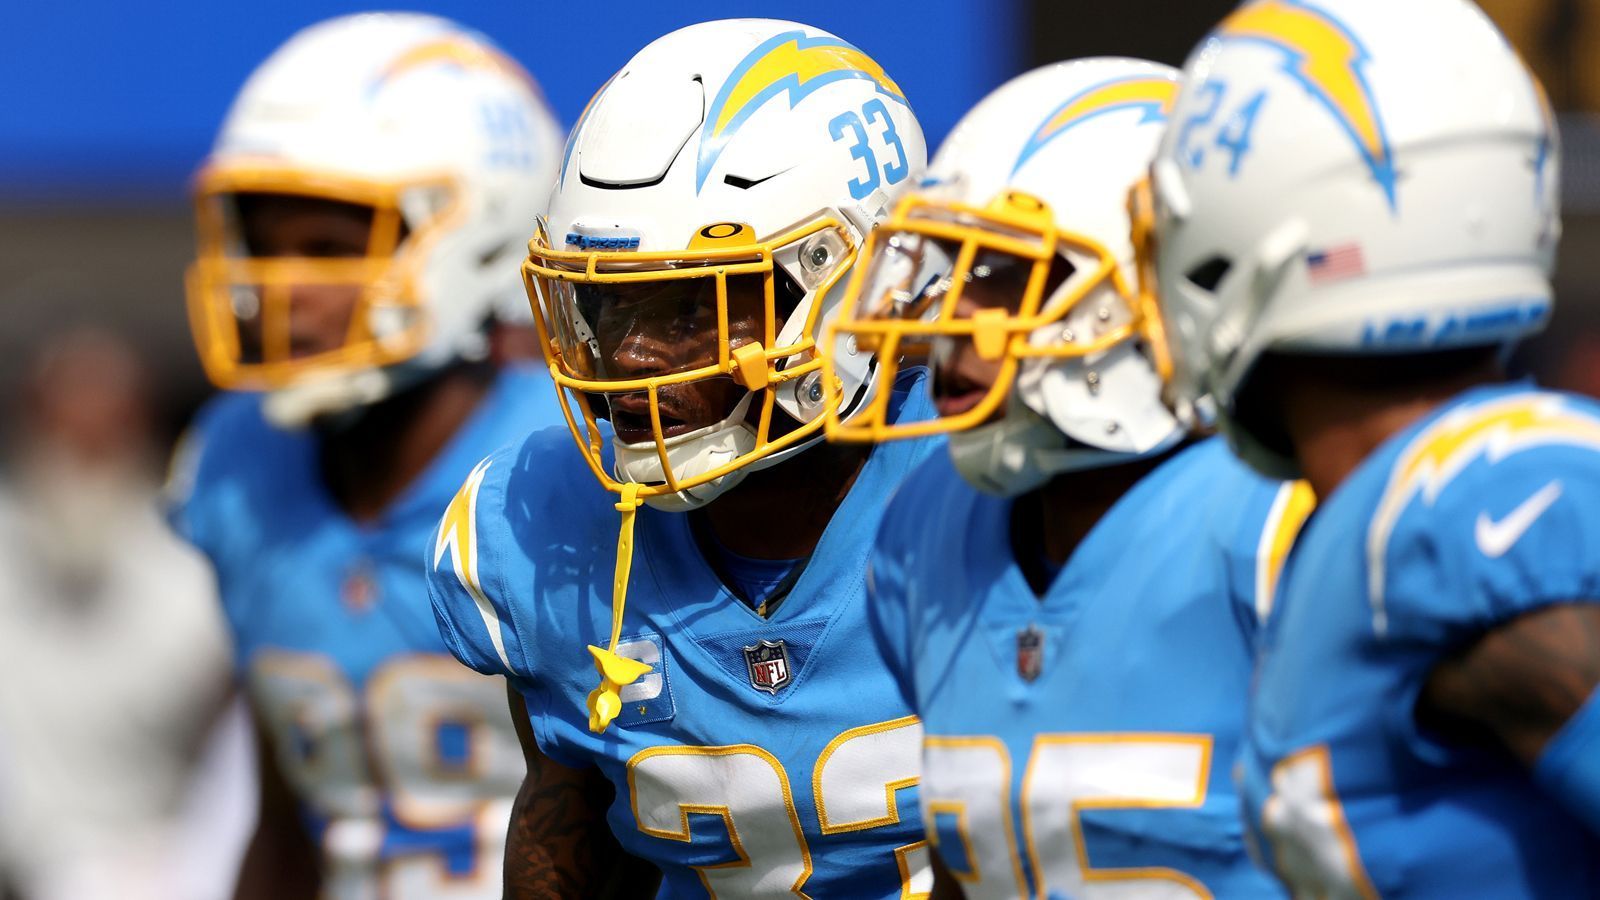 
                <strong>Draft-Pick 17: Los Angeles Chargers</strong><br>
                &#x2022; Saison-Bilanz: 9-8<br>&#x2022; Strength of Schedule: 0,510<br>
              